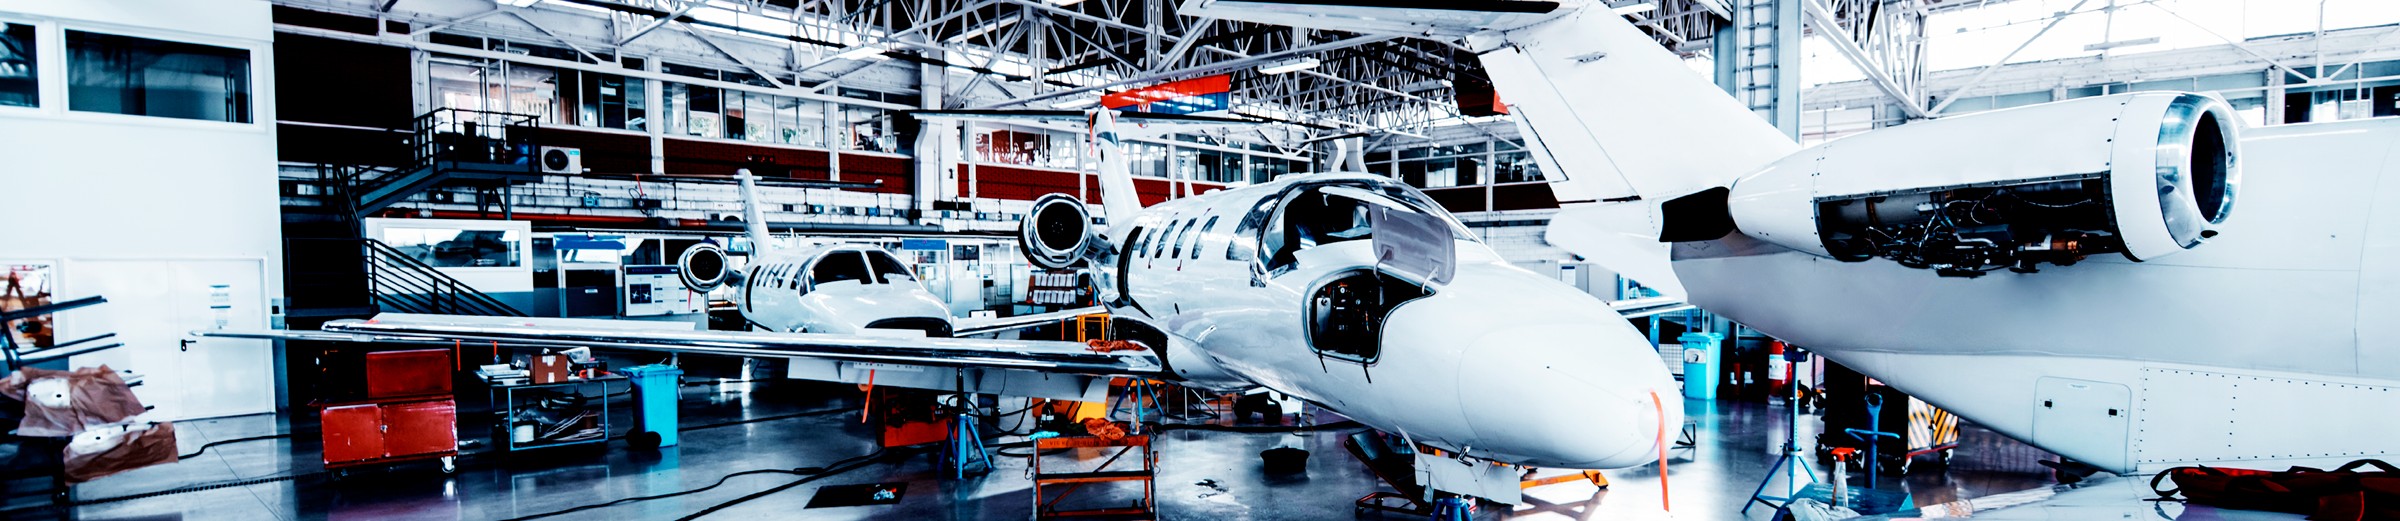 The brightly lit aircraft maintenance hangar features two white jets. In the foreground, a jet with an open nose cone reveals internal components. Behind it, another intact jet awaits service. Tools and equipment are scattered on the floor, and a staircase leads to an upper level.